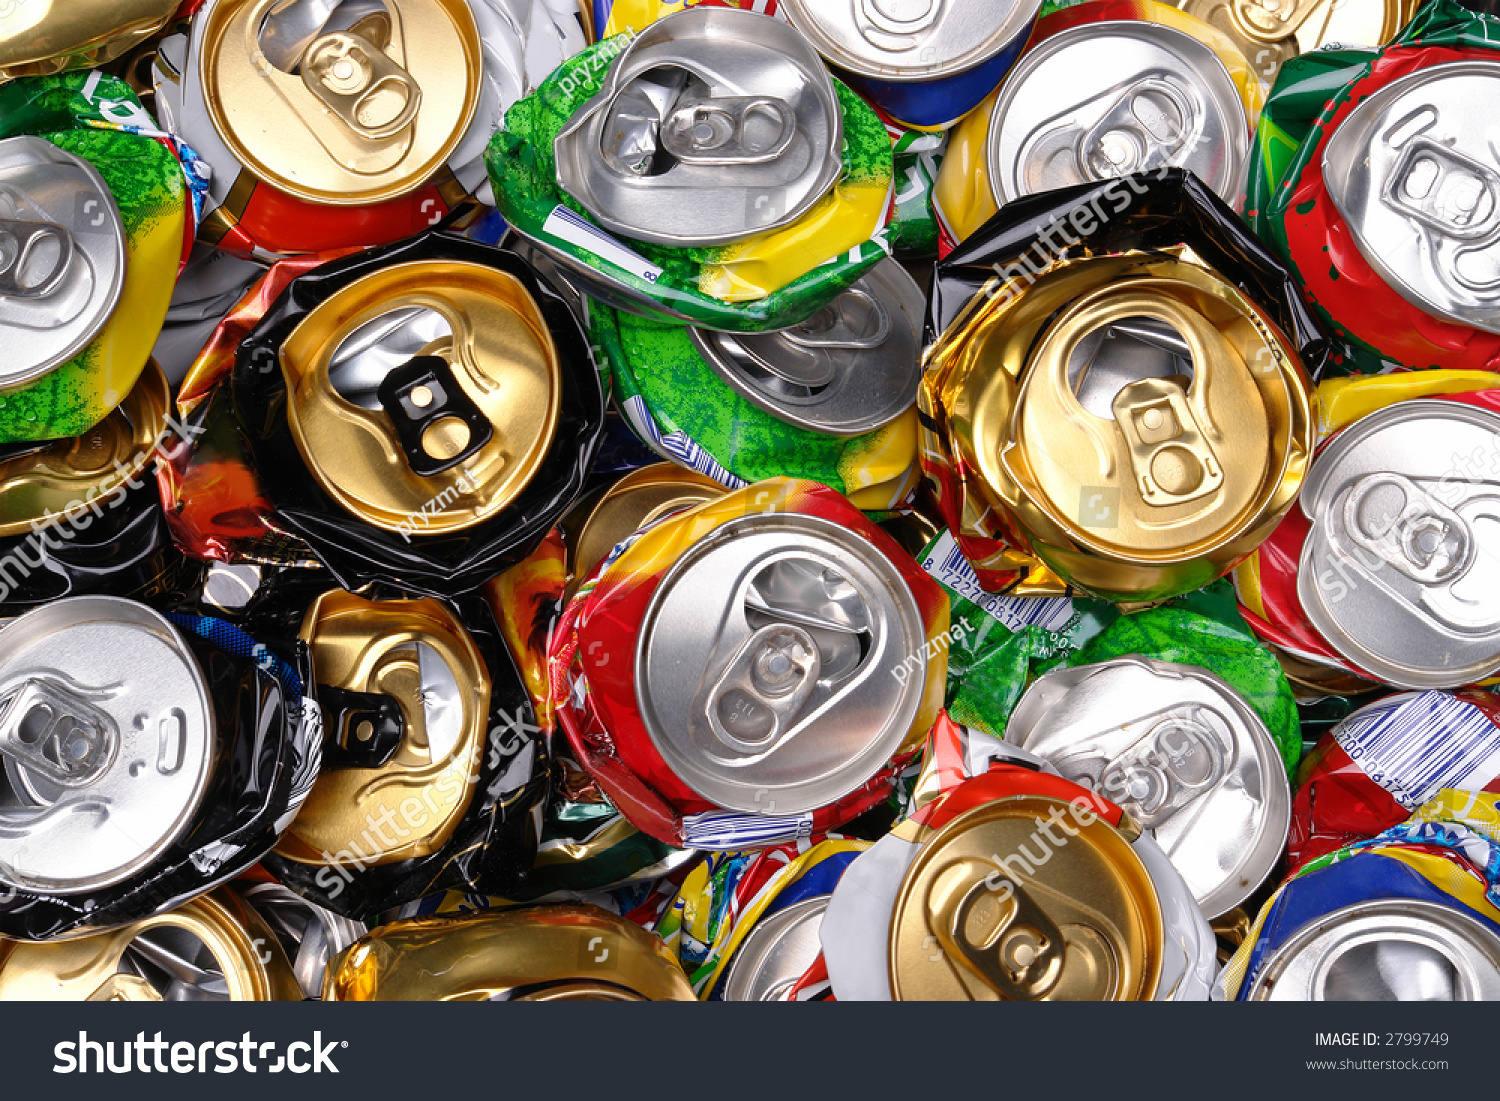 Background of various crashed beer cans #2799749